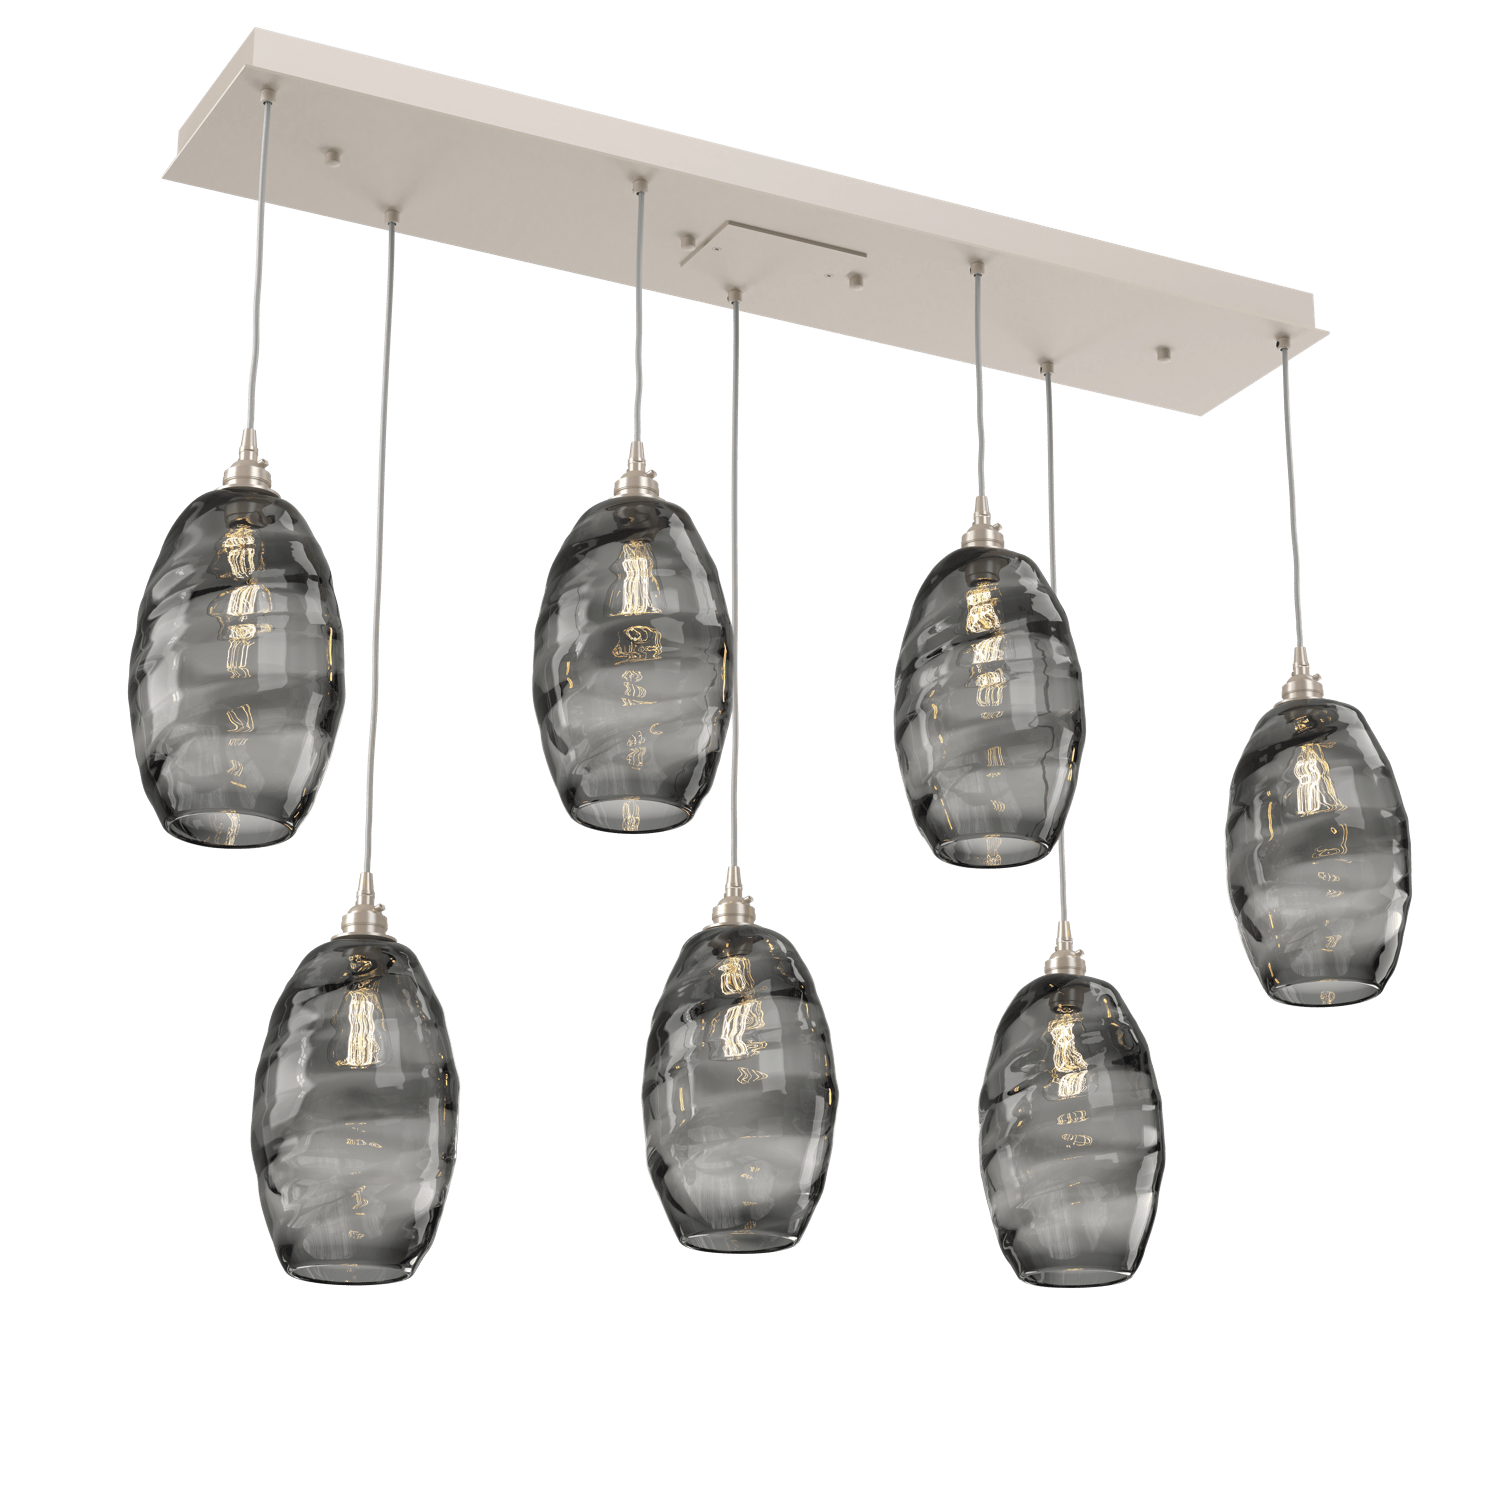 PLB0035-07-BS-OS-Hammerton-Studio-Optic-Blown-Glass-Elisse-7-light-linear-pendant-chandelier-with-metallic-beige-silver-finish-and-optic-smoke-blown-glass-shades-and-incandescent-lamping